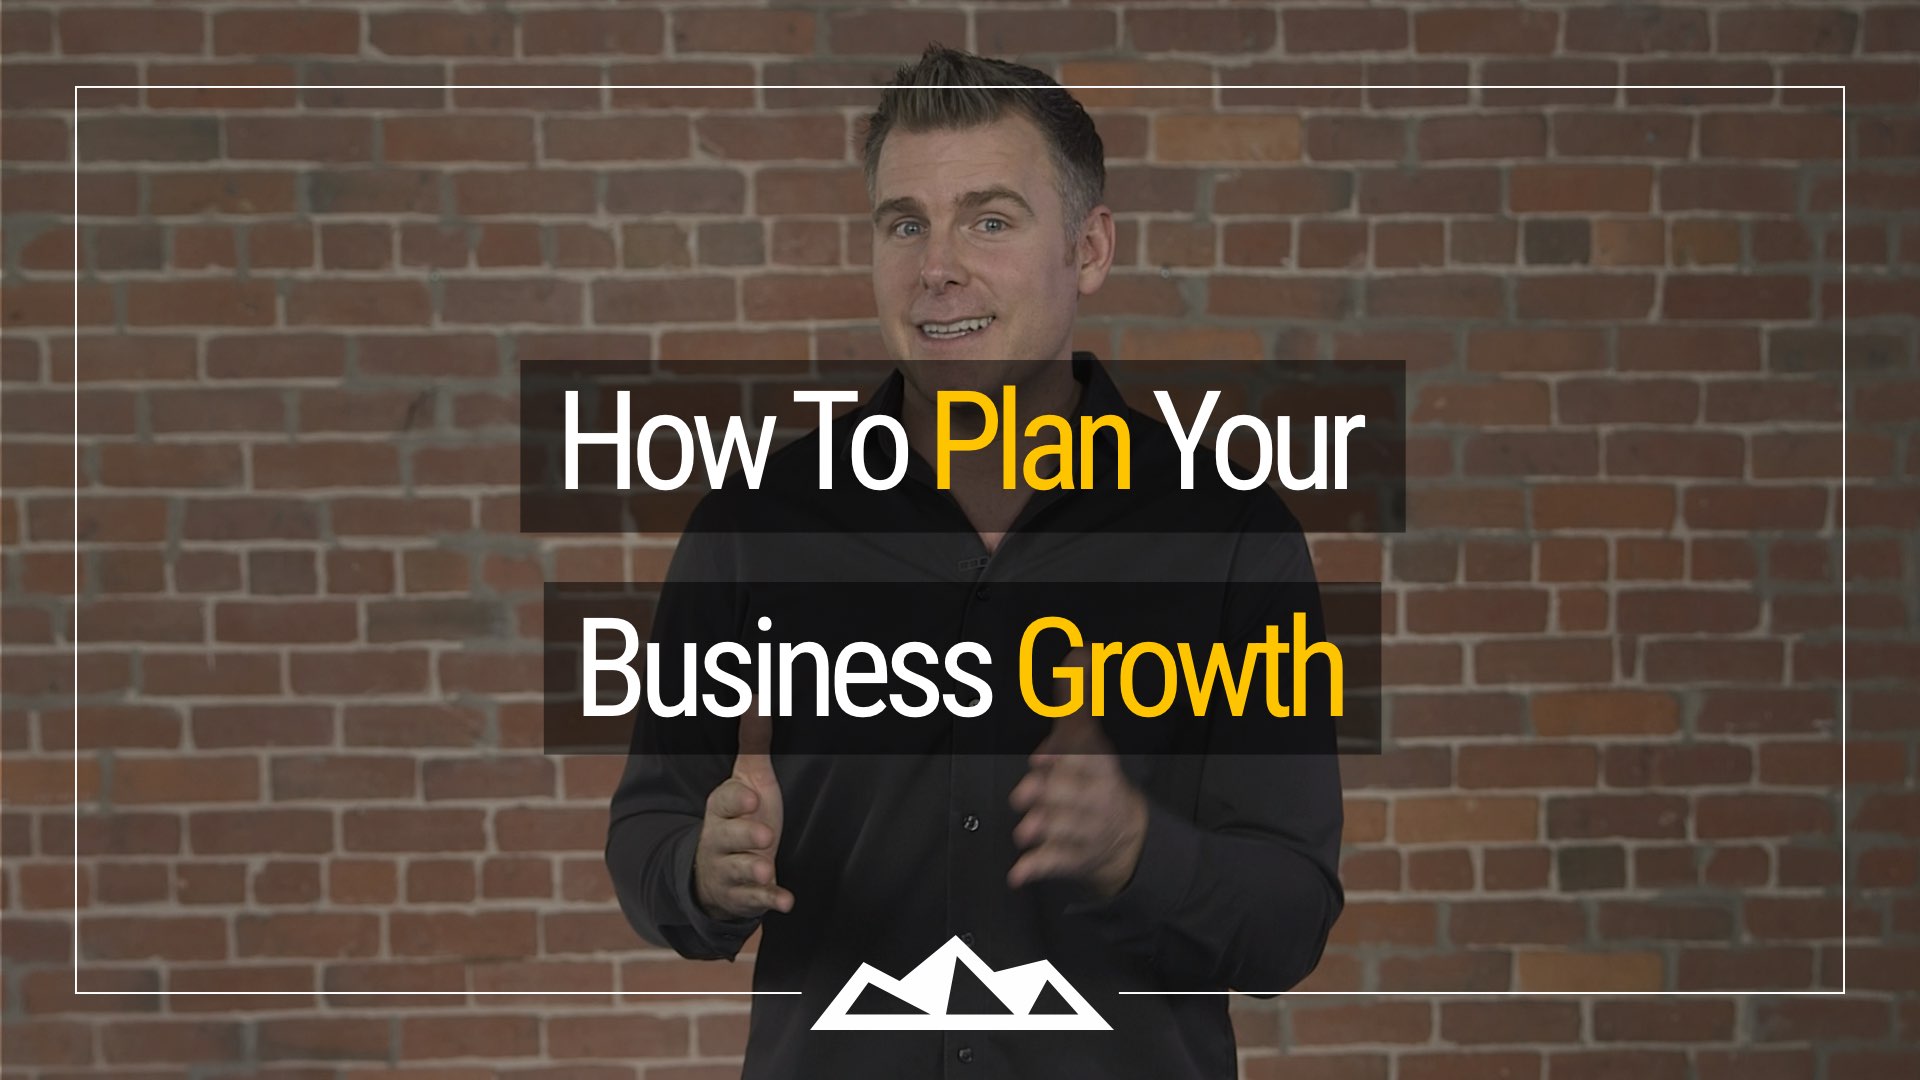 Strategic Planning: The 6 Key Elements To Business Growth